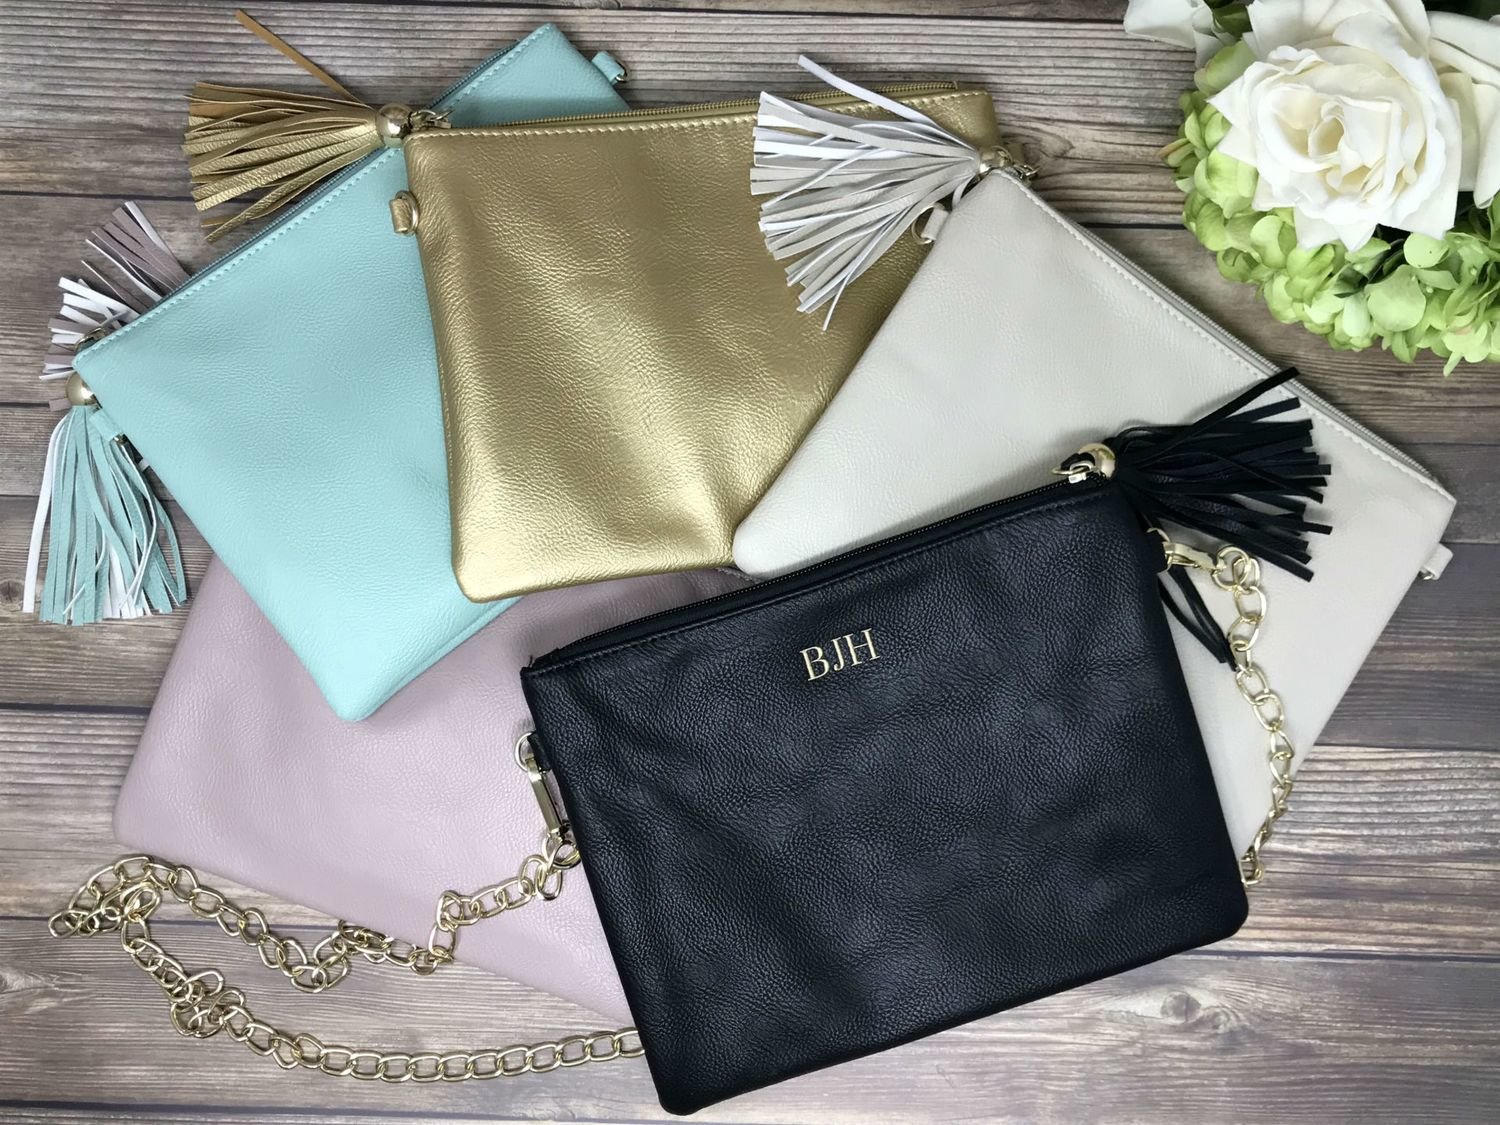 Monogrammed Purse  Outfit accessories, Tassel purse, Monogrammed